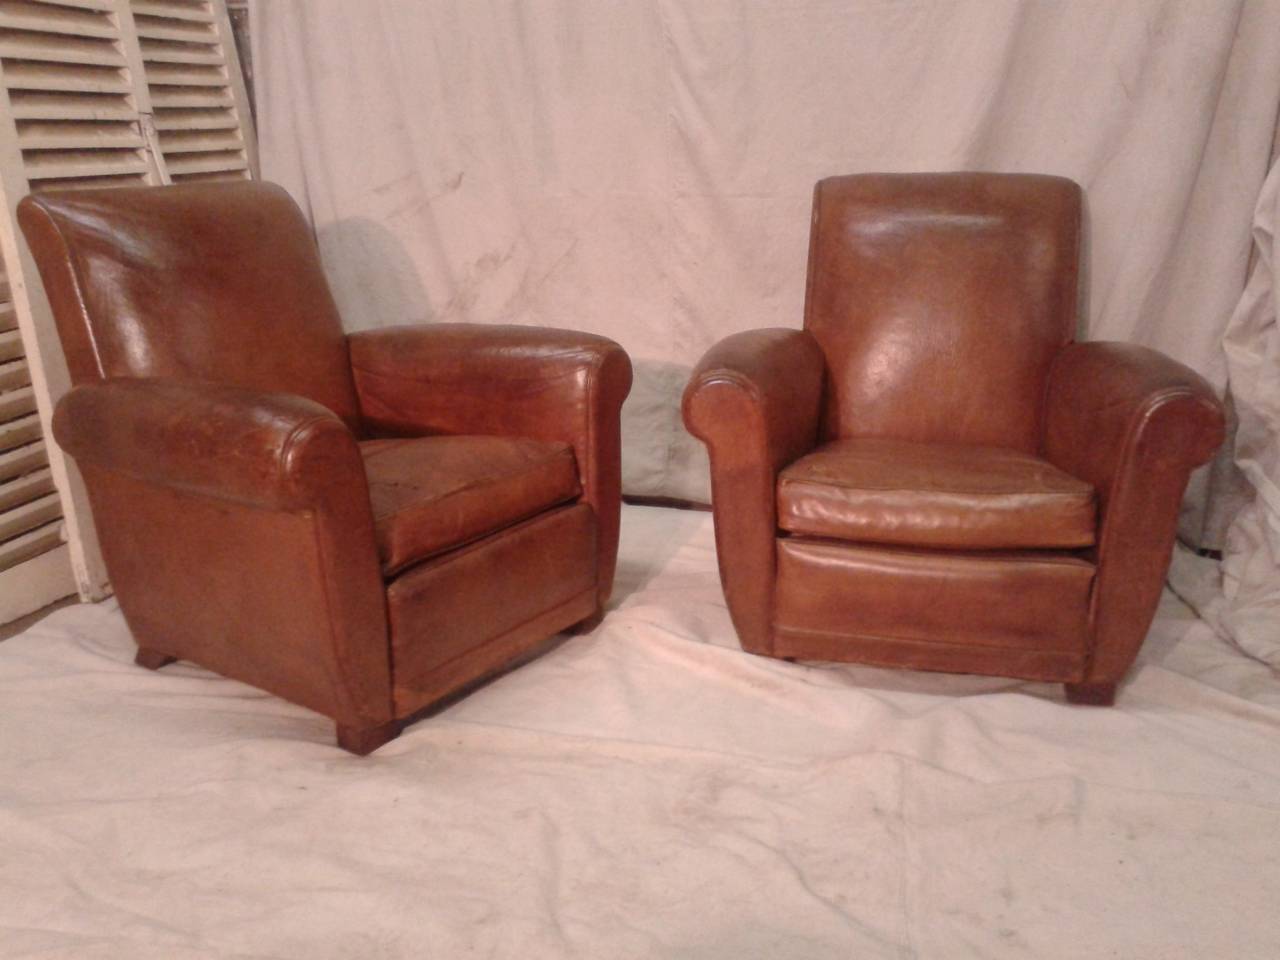 A fine pair of French clubs leather chairs. Made in 1960, the leather is well worn and has the old patina, which give it so much charm.